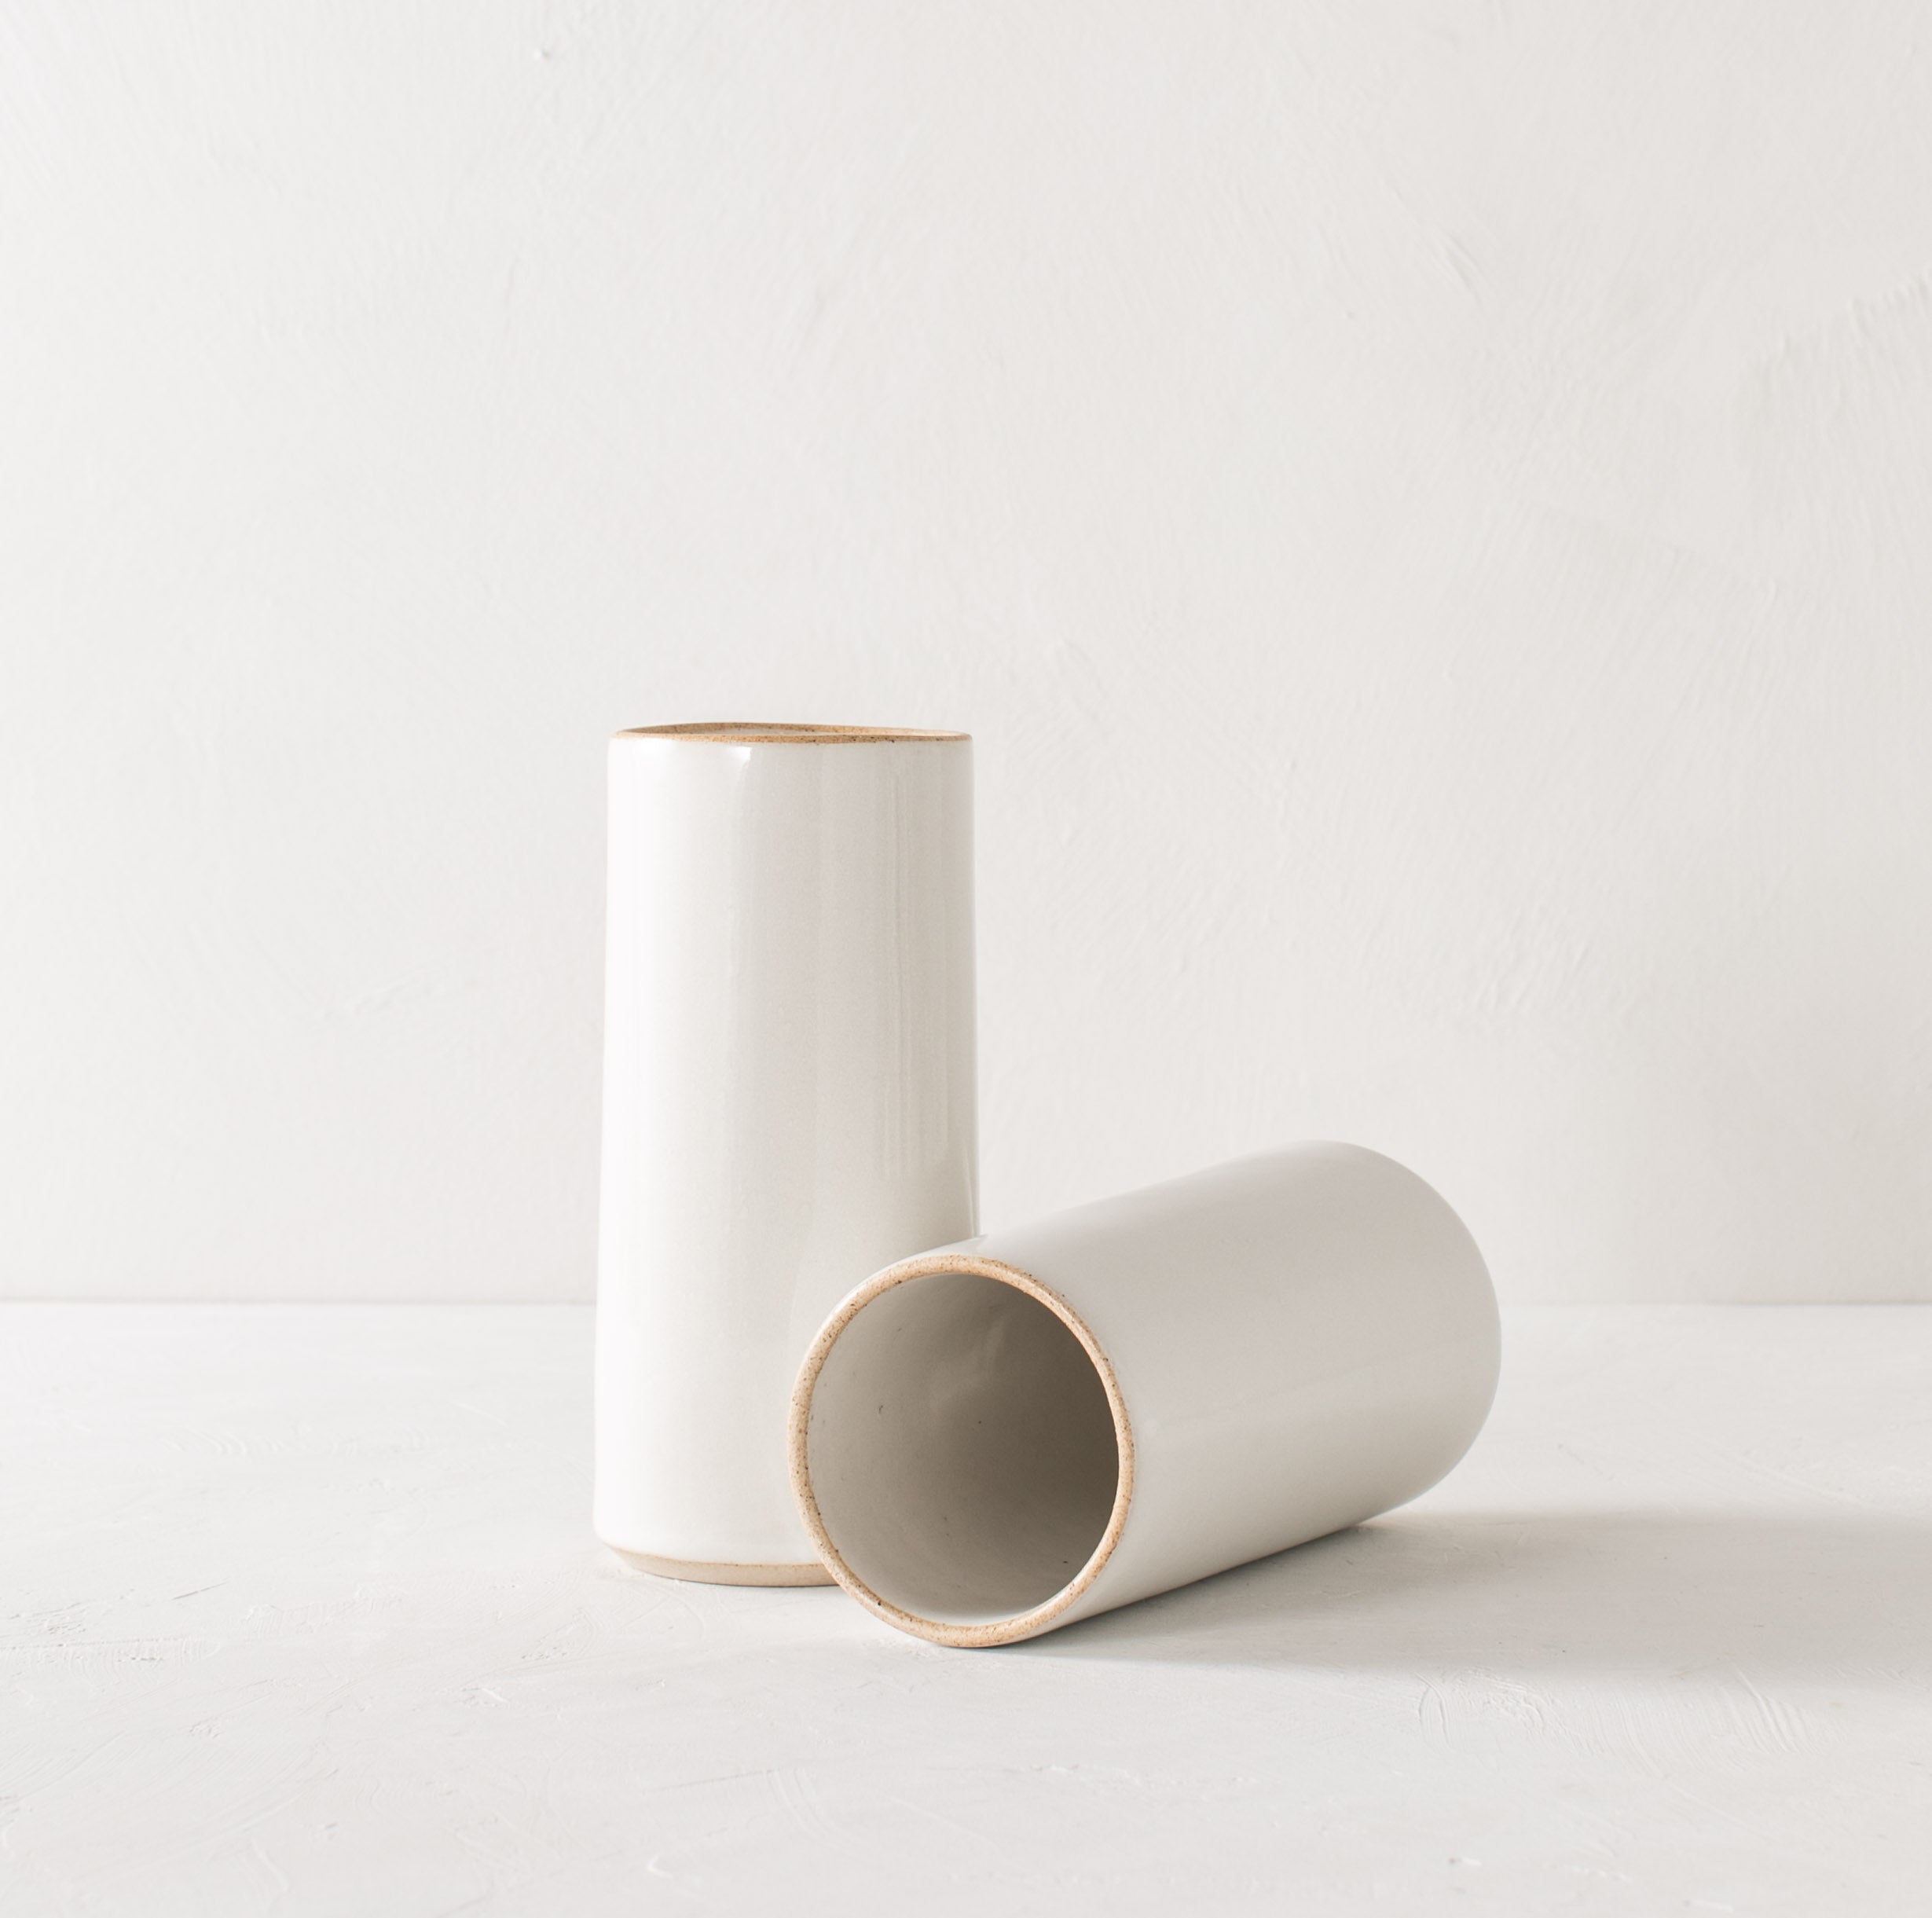 Two tall white glazed ceramic cylinder vases with an exposed stoneware rim and base. One standing up the other on its side leaning against the standing vase. Staged on a white textured plaster table and a white plaster textured wall. Designed and sold by Convivial Production, Kansas City Ceramics.